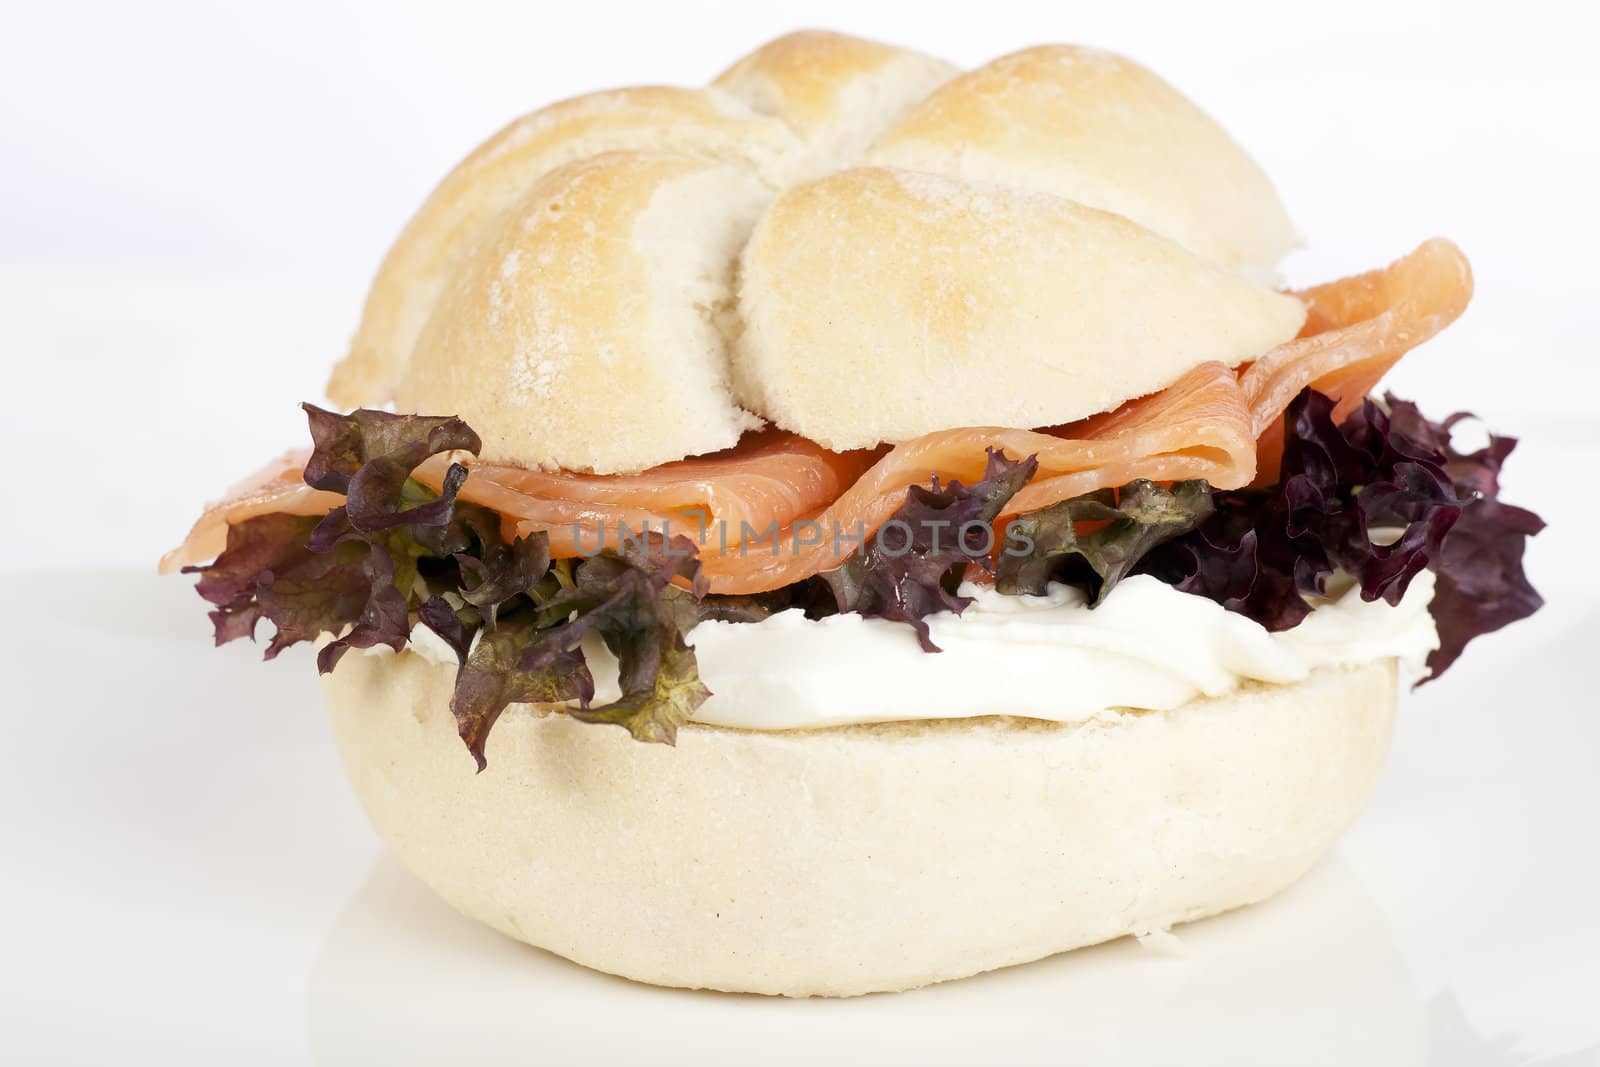 Healthy smoked salmon with cream cheese and salad on kaiser roll.